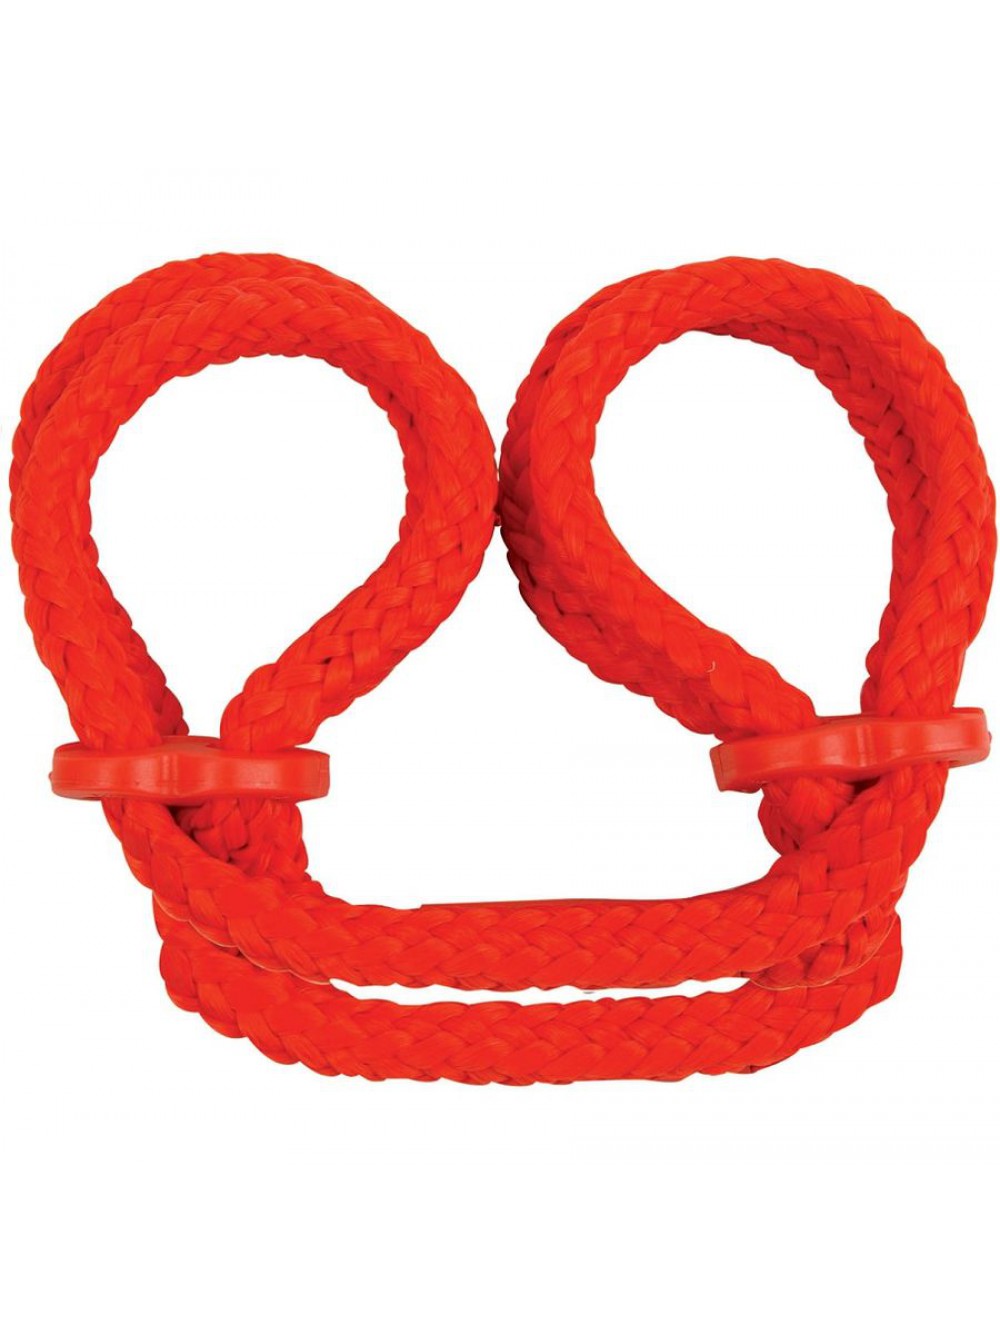 JAPANESE SILK LOVE ROPE ANKLE CUFFS RED